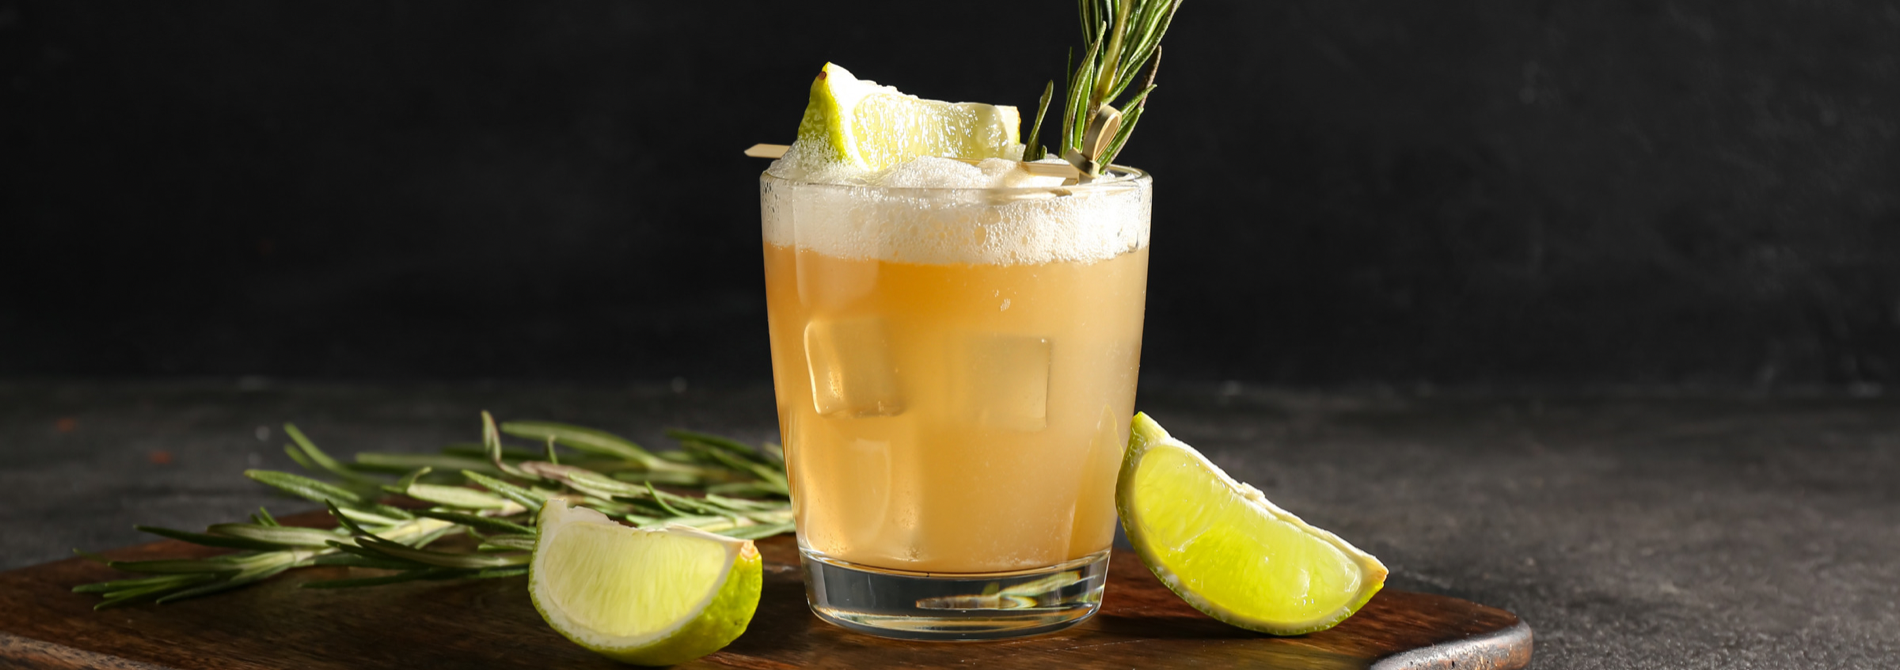 National Whiskey Sour Day: Three Whiskey Sours With A Twist, How To Elevate Your Whiskey Sour With Unique Flavors